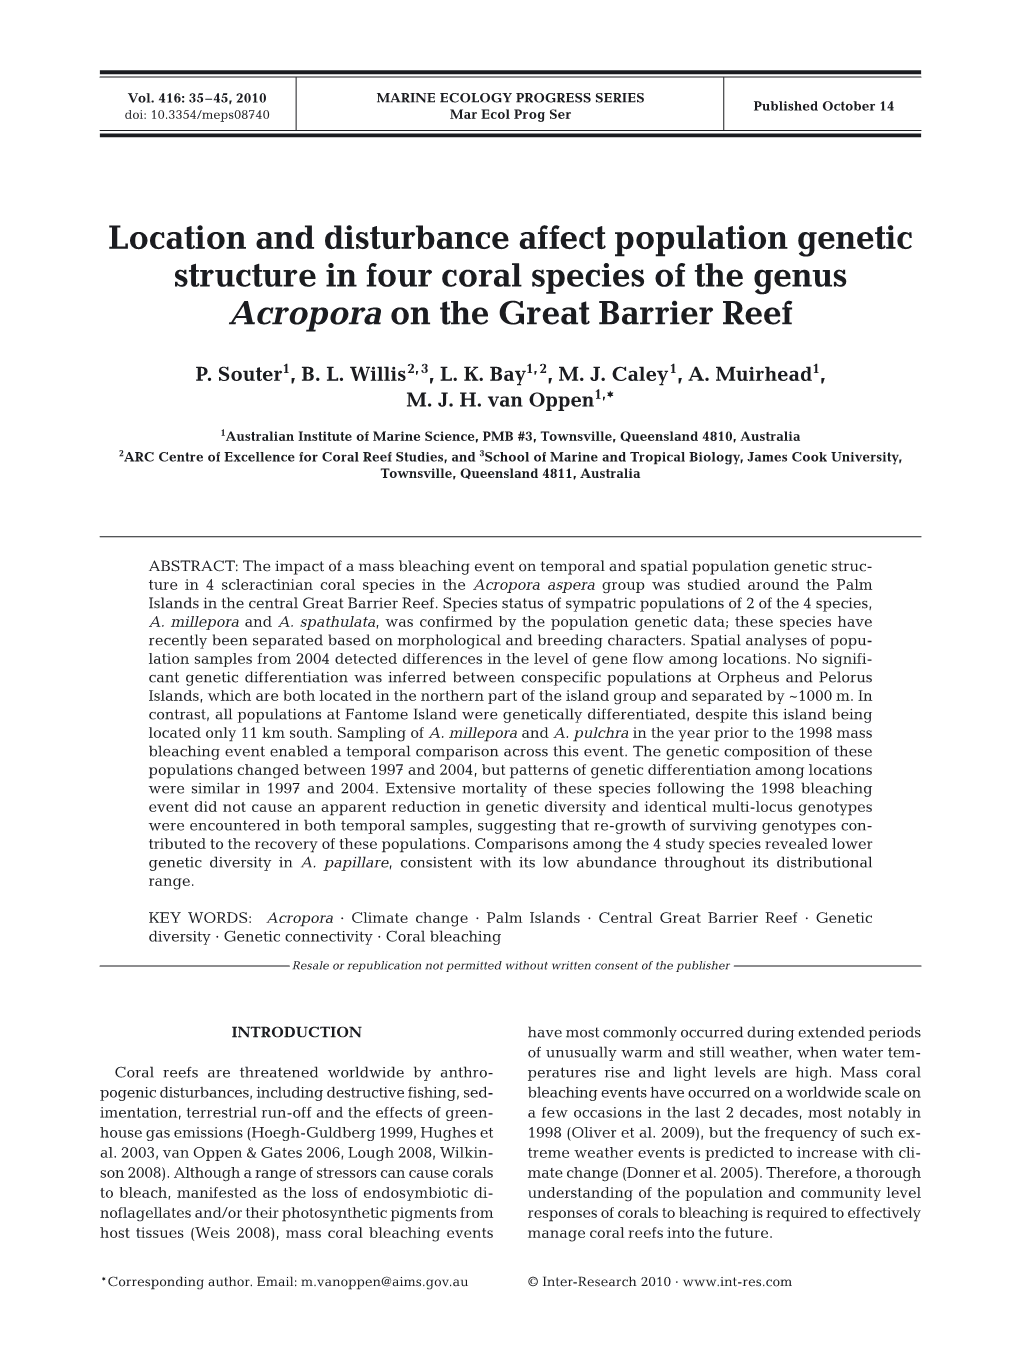 Location and Disturbance Affect Population Genetic Structure in Four Coral Species of the Genus Acropora on the Great Barrier Reef